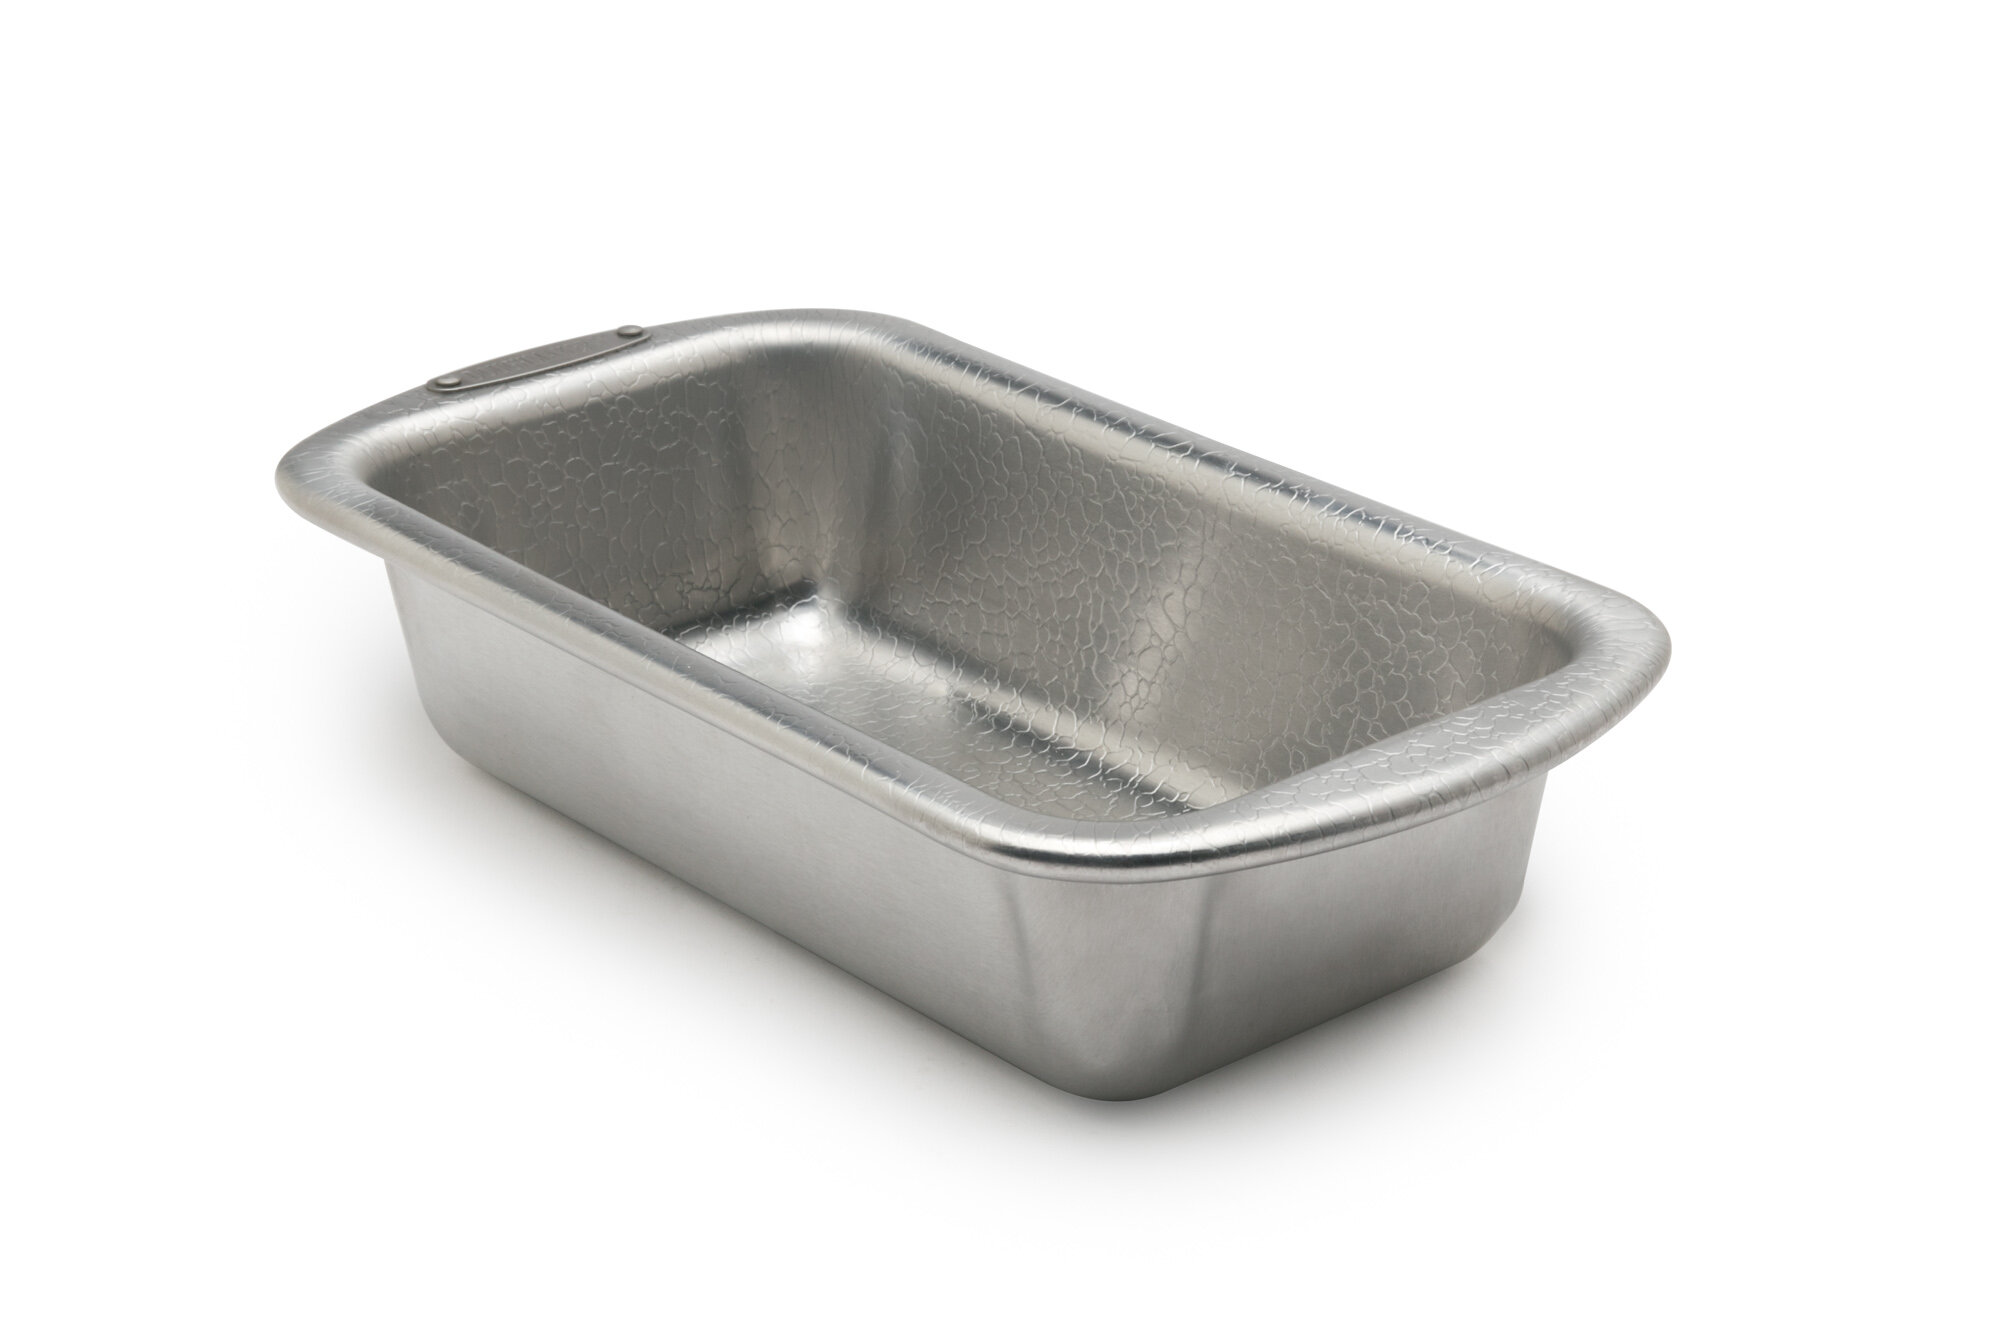 Wilton Bake It Better Non Stick Loaf Pans for Bread, Cake,meat. Pre Own